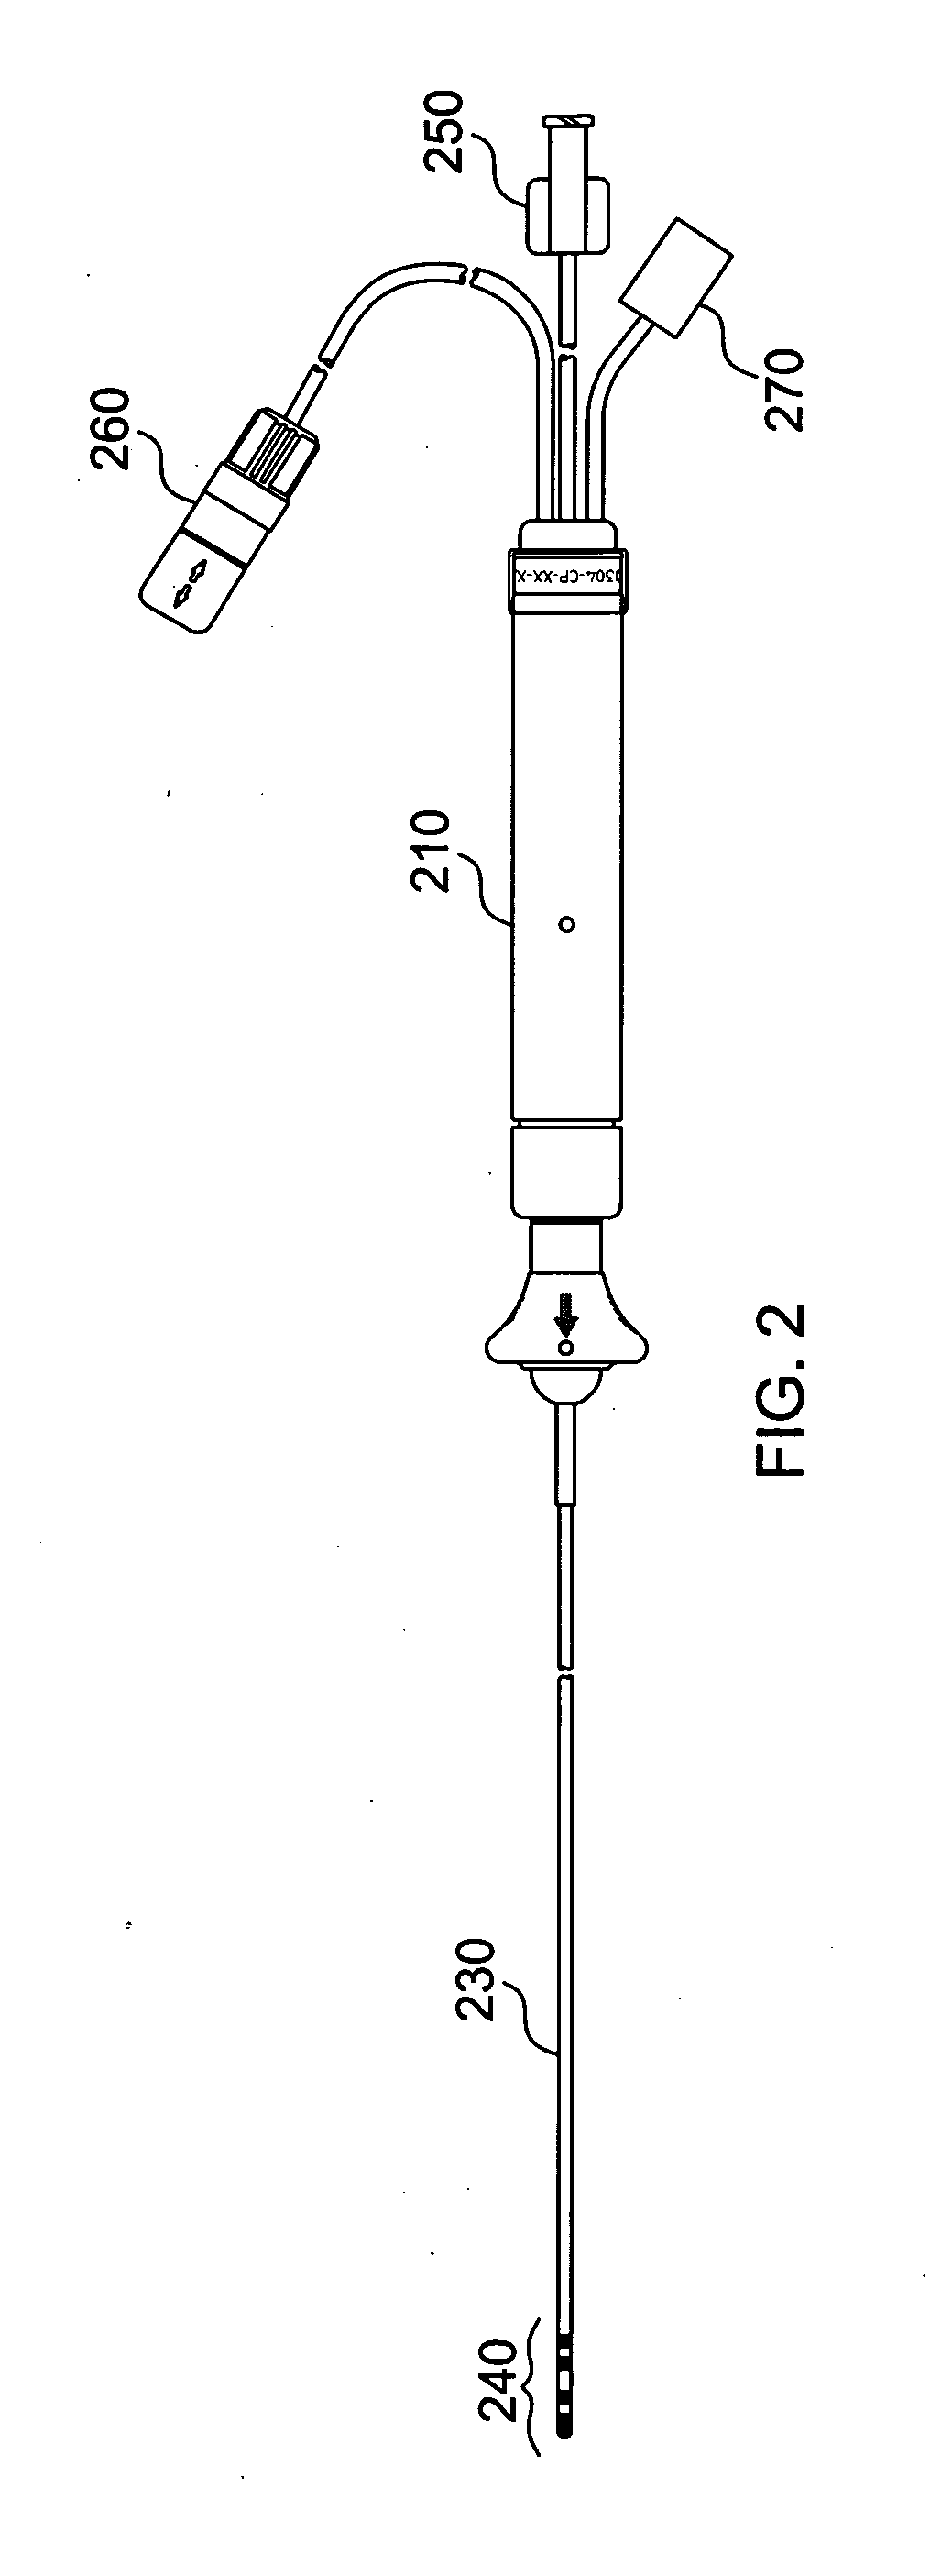 Ablation and monitoring system including a fiber optic imaging catheter and an optical coherence tomography system